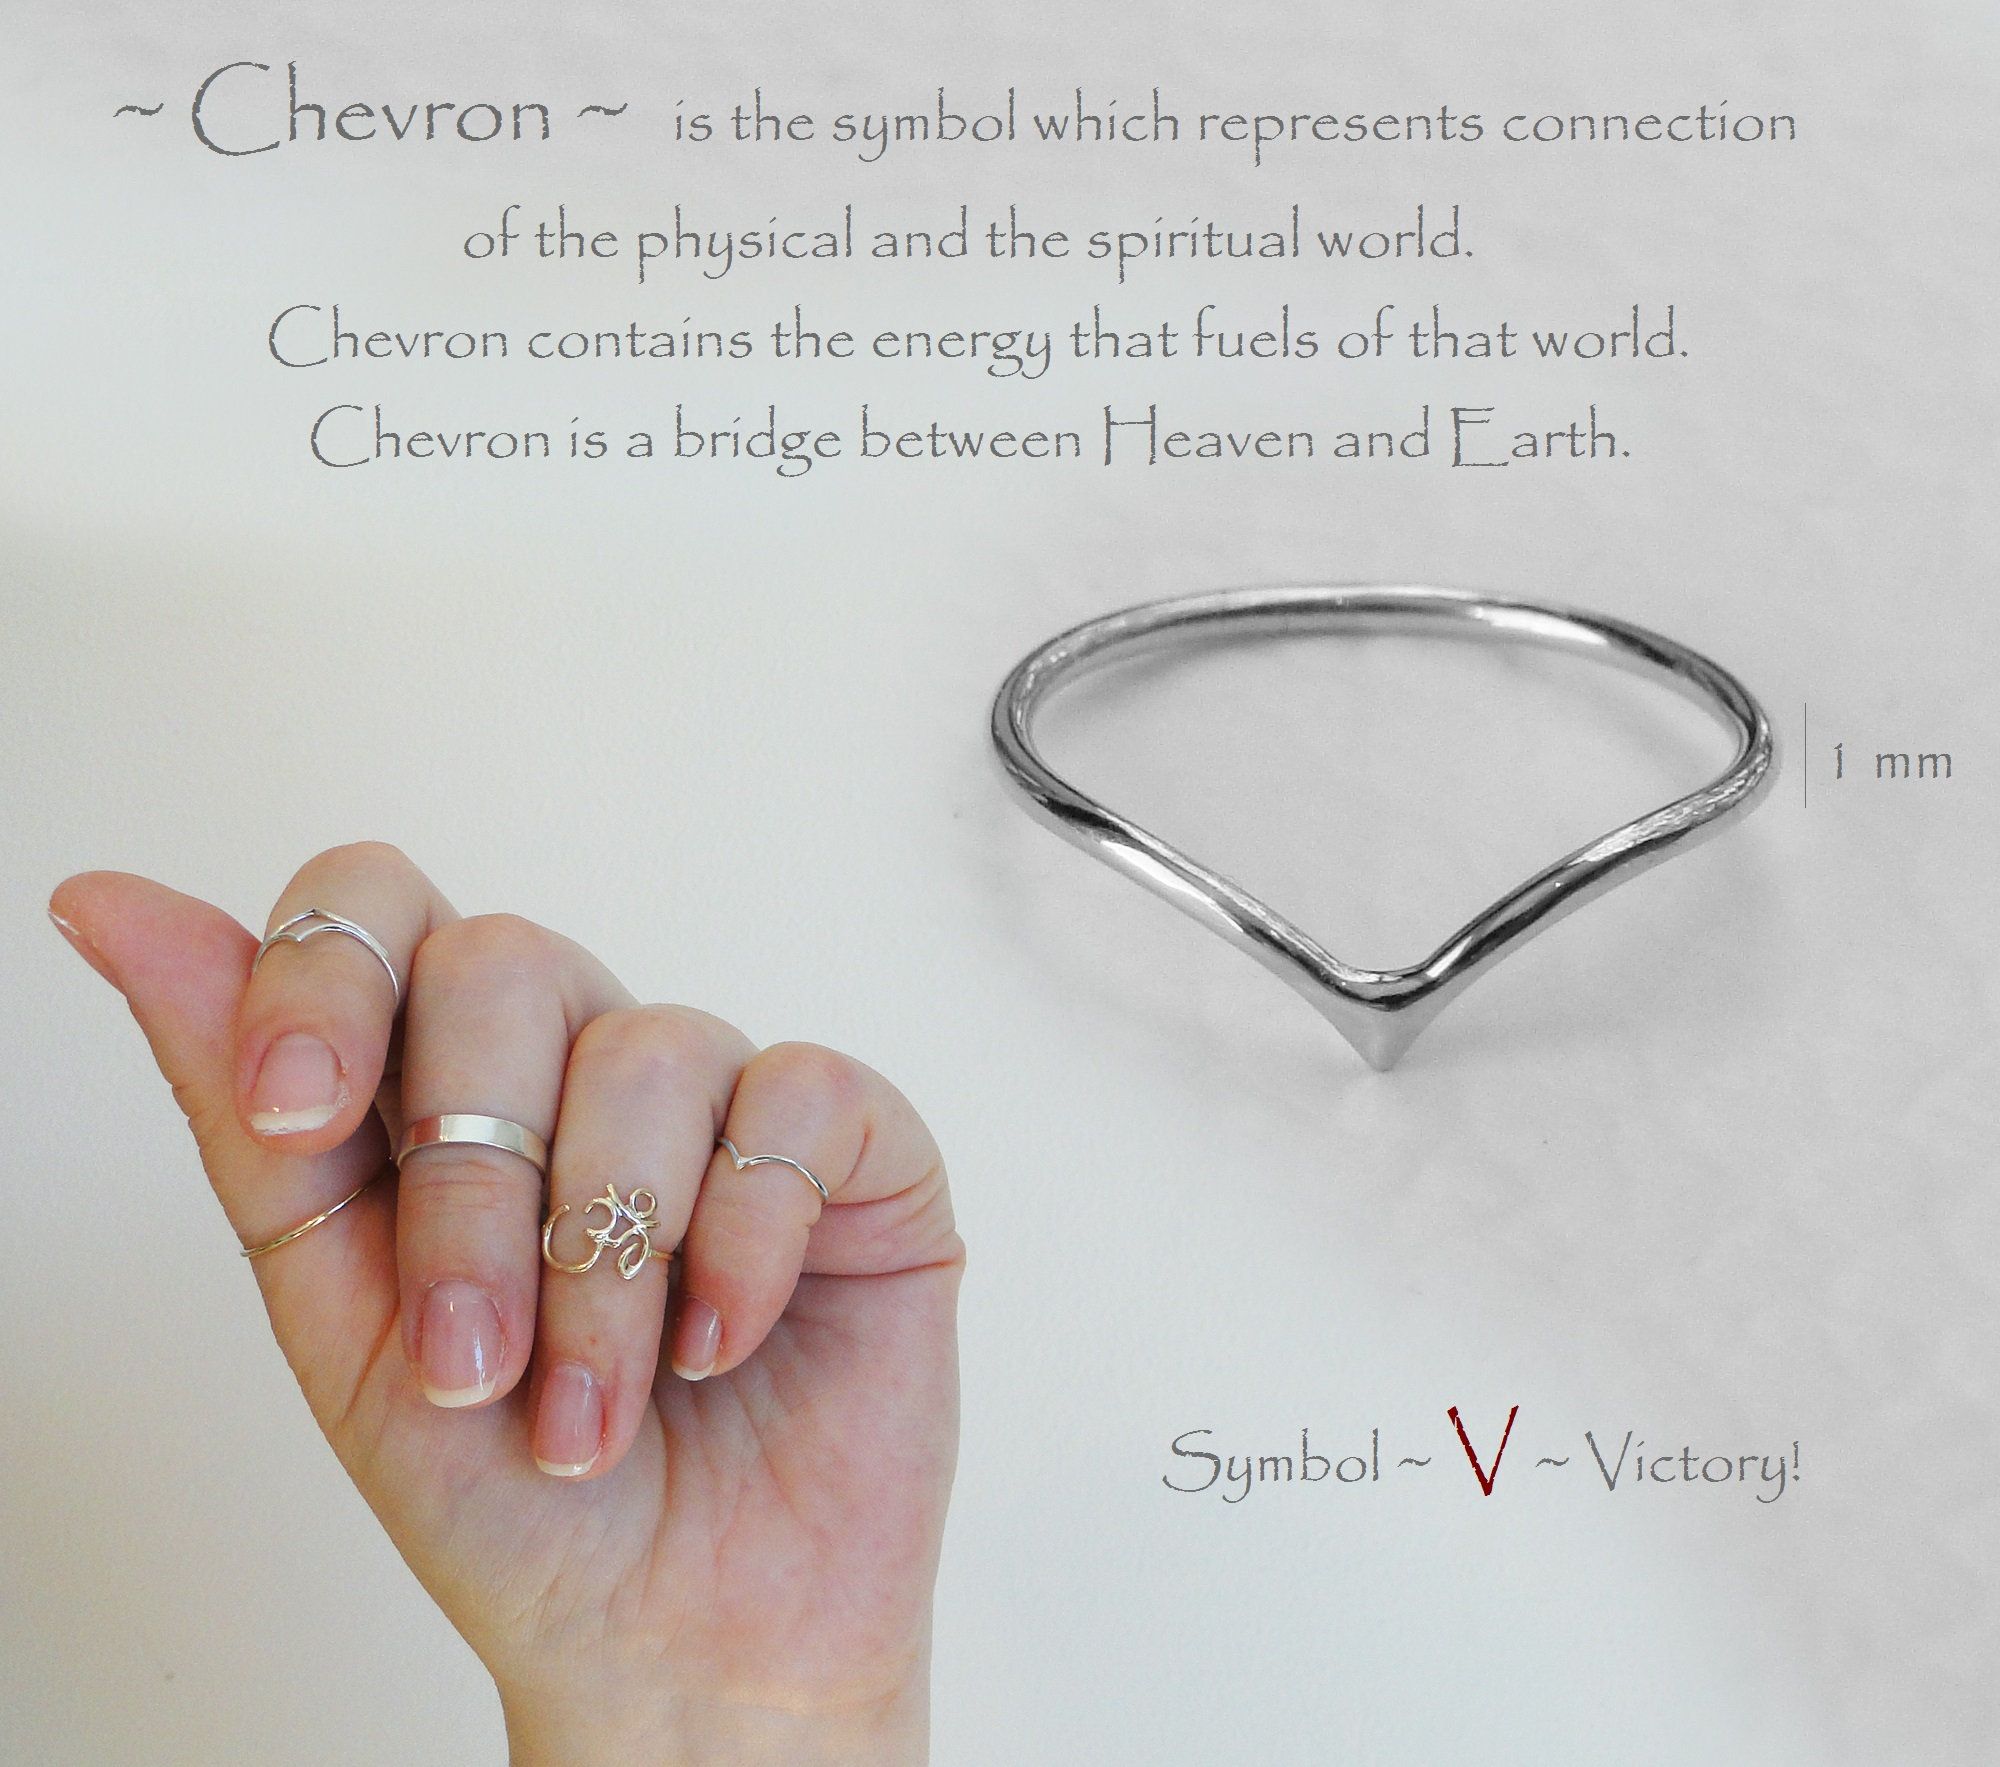 Chevron Ring 1 Mm Wishbone Tiara Delicate Sterling Silver Band Or Midi Ring  Symbol Of The Physical And The Spiritual World (View 11 of 25)